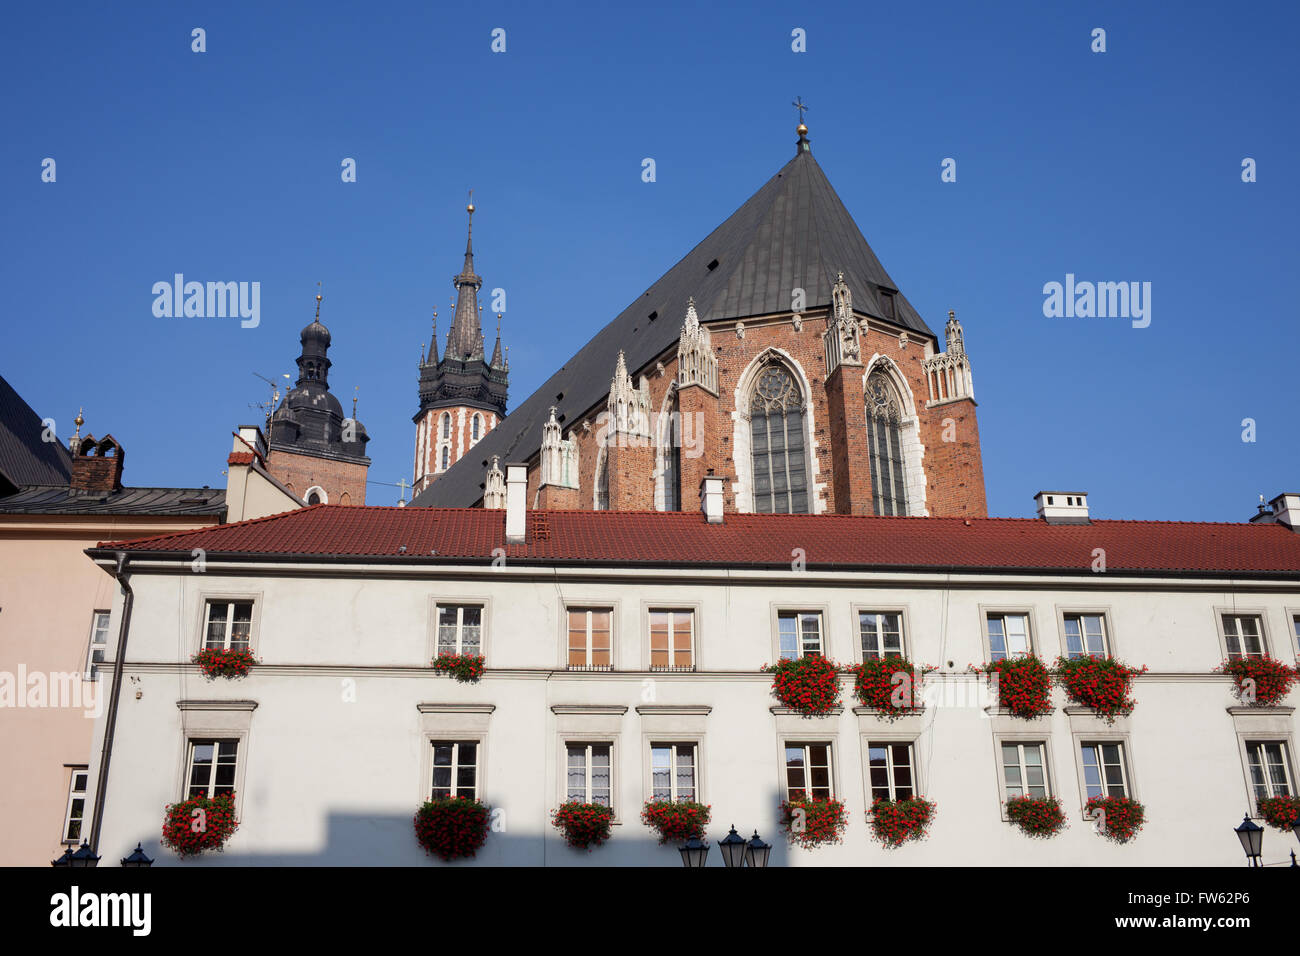 Poland, Krakow, Old Town, presbytery building on Small Market Square, St. Mary's Basilica in the background Stock Photo